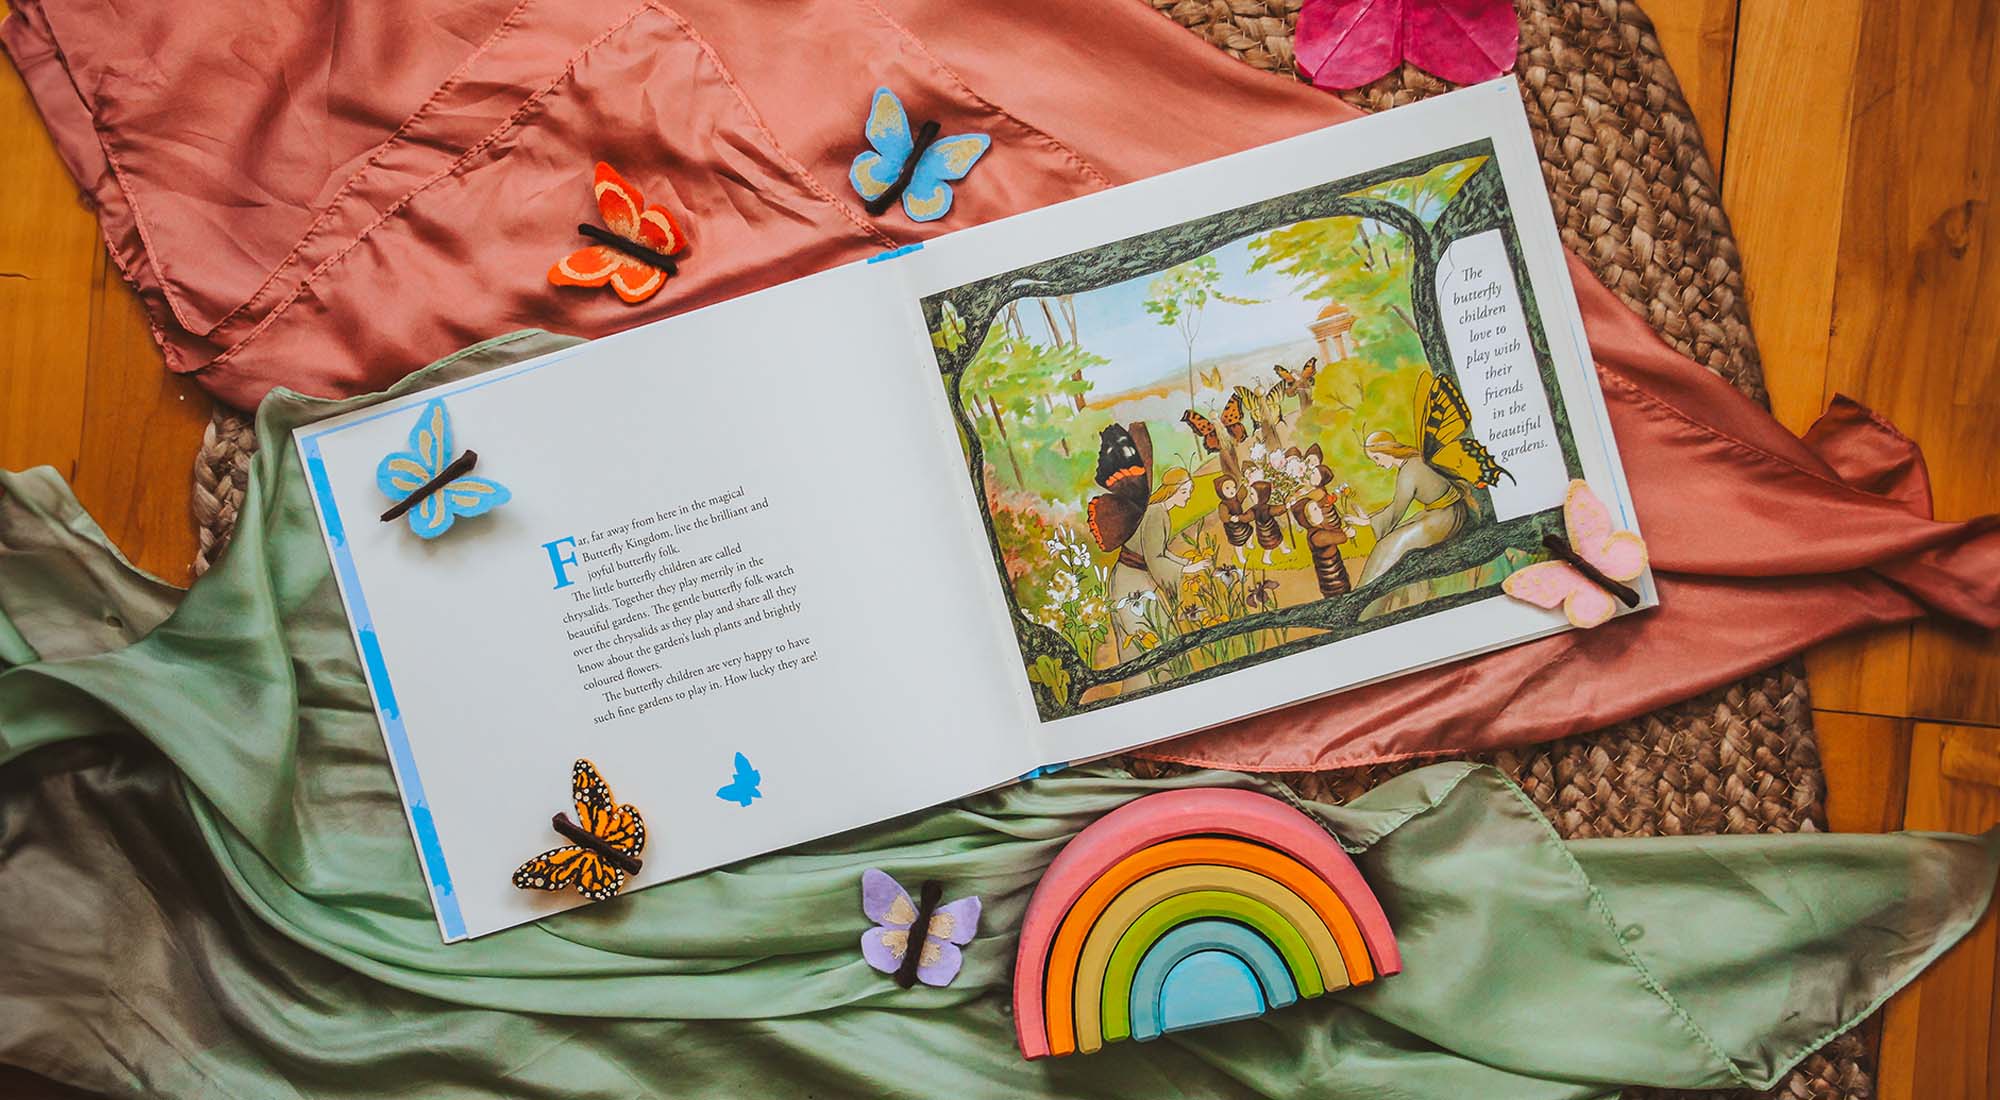 Butterfly Children book open laying on playsilks with a rainbow and felt butterflies.